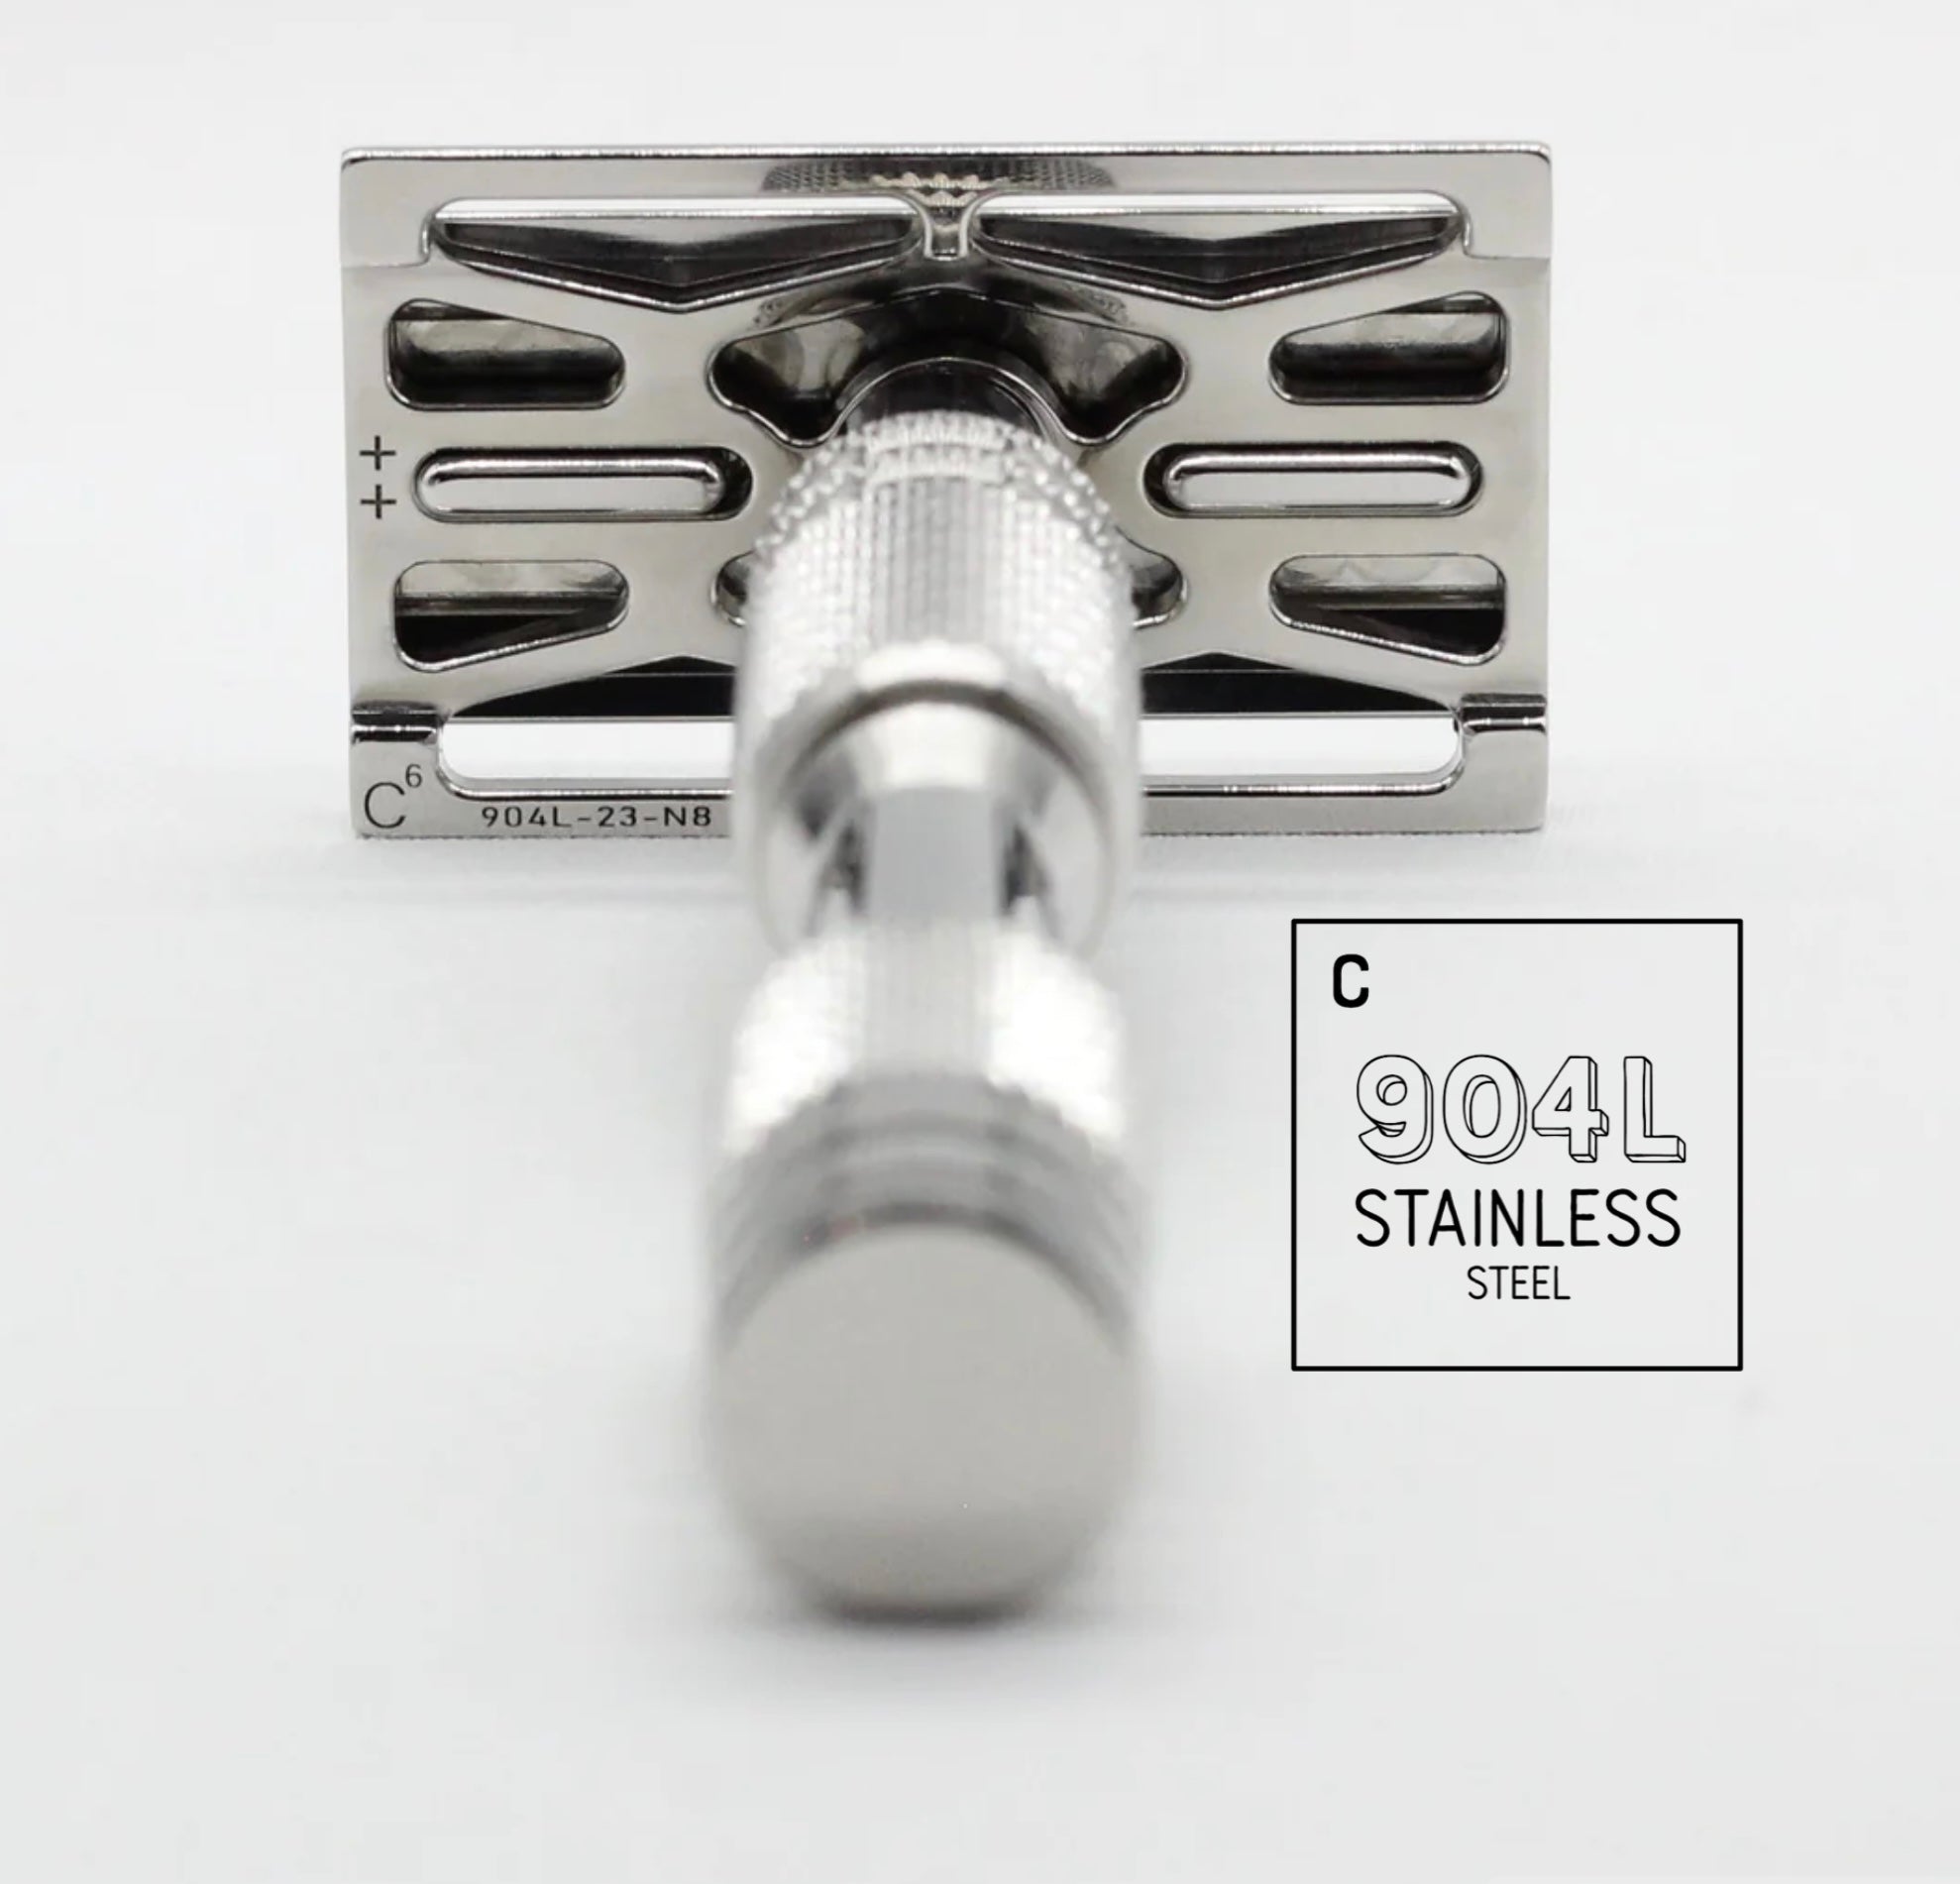 The Cutting Edge of Shaving: Discover the World's First 904L Stainless Steel Luxury Safety Razor